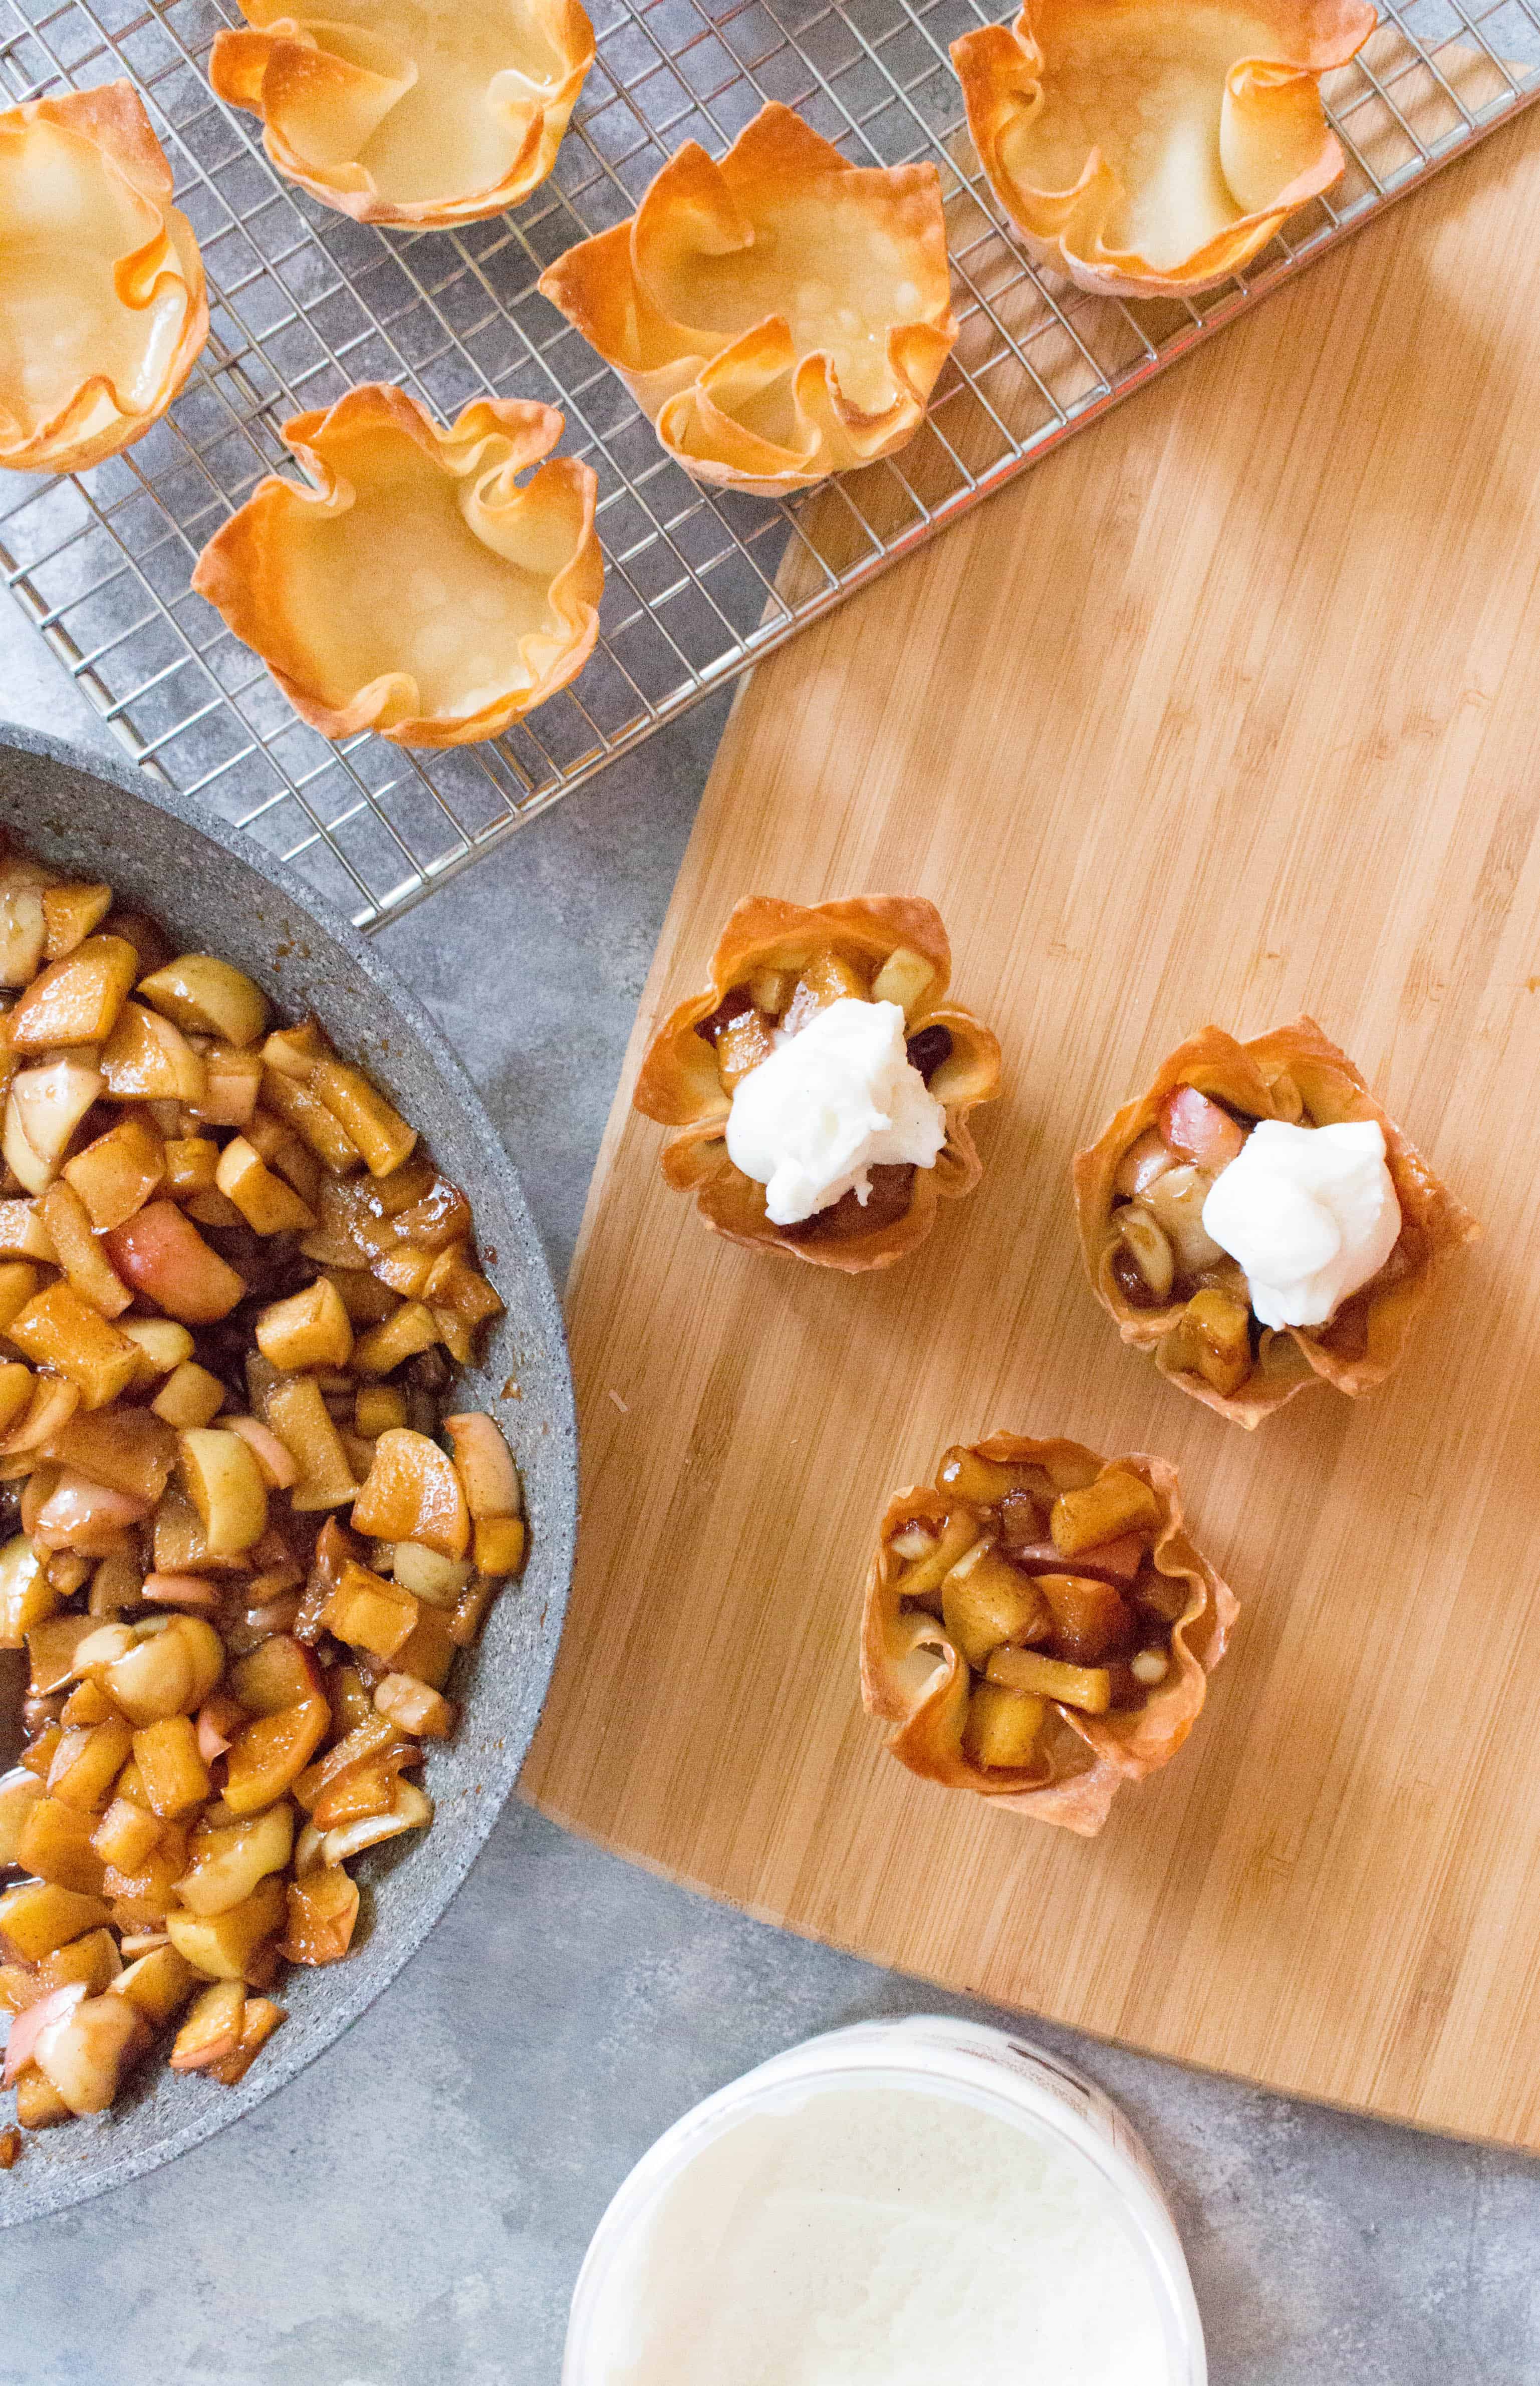 Take a fun new twist on your traditional apple pie with this wonton apple pie. Plus, individual servings means less time spent cutting and more time eating!